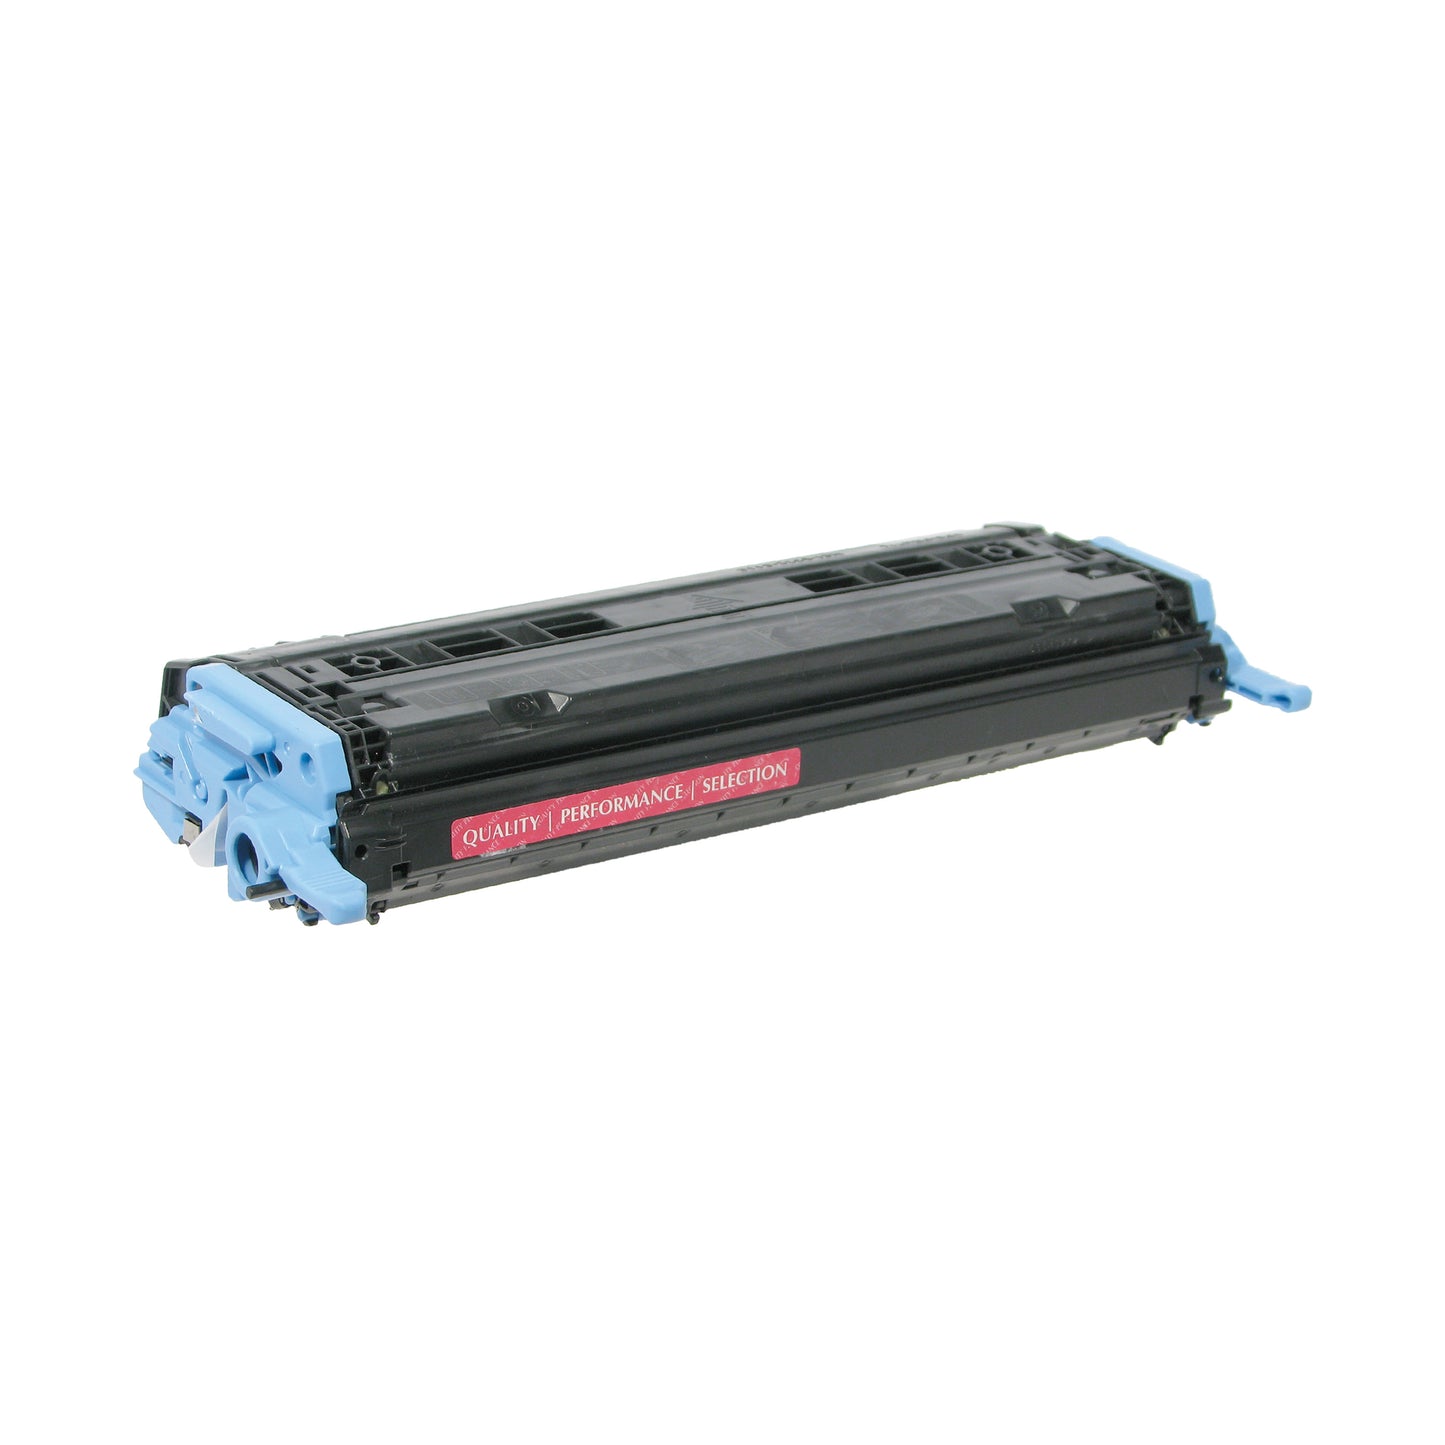 HP 124A (Q6003A) Magenta Remanufactured Toner Cartridge [2,000 pages]